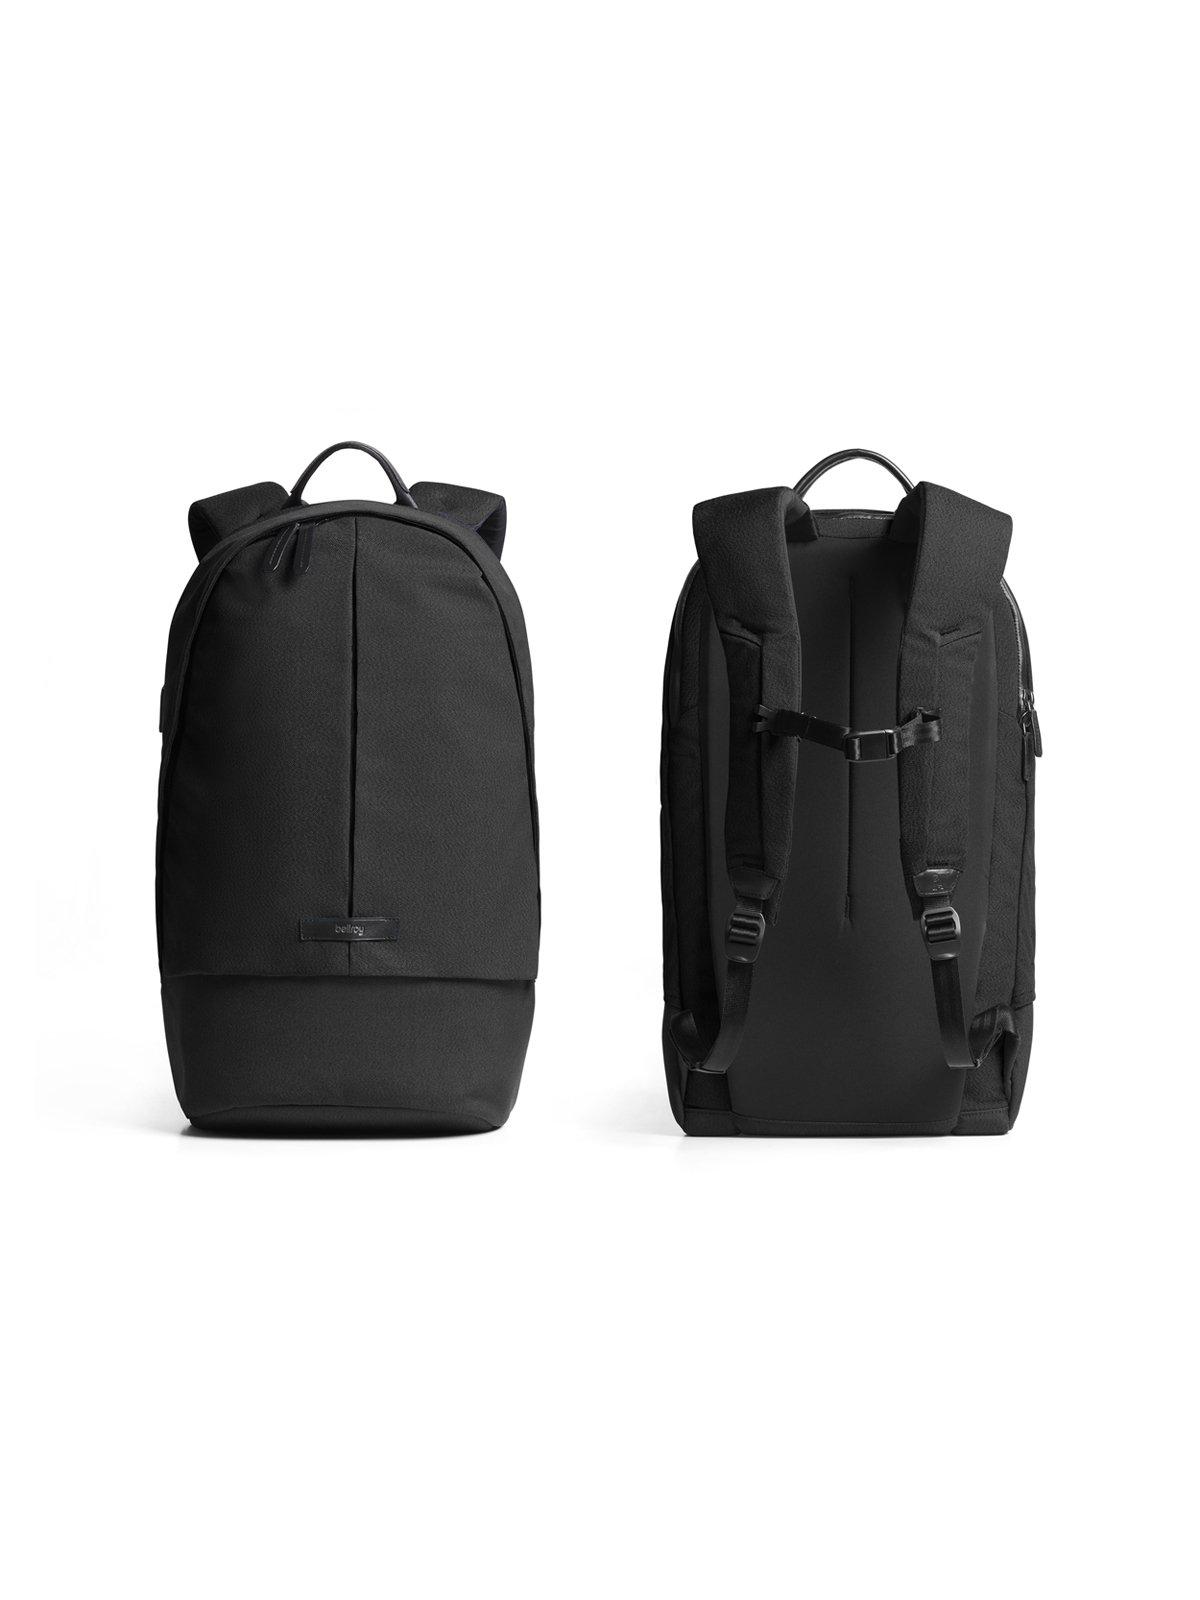 Bellroy Classic Backpack Plus Black - MORE by Morello Indonesia